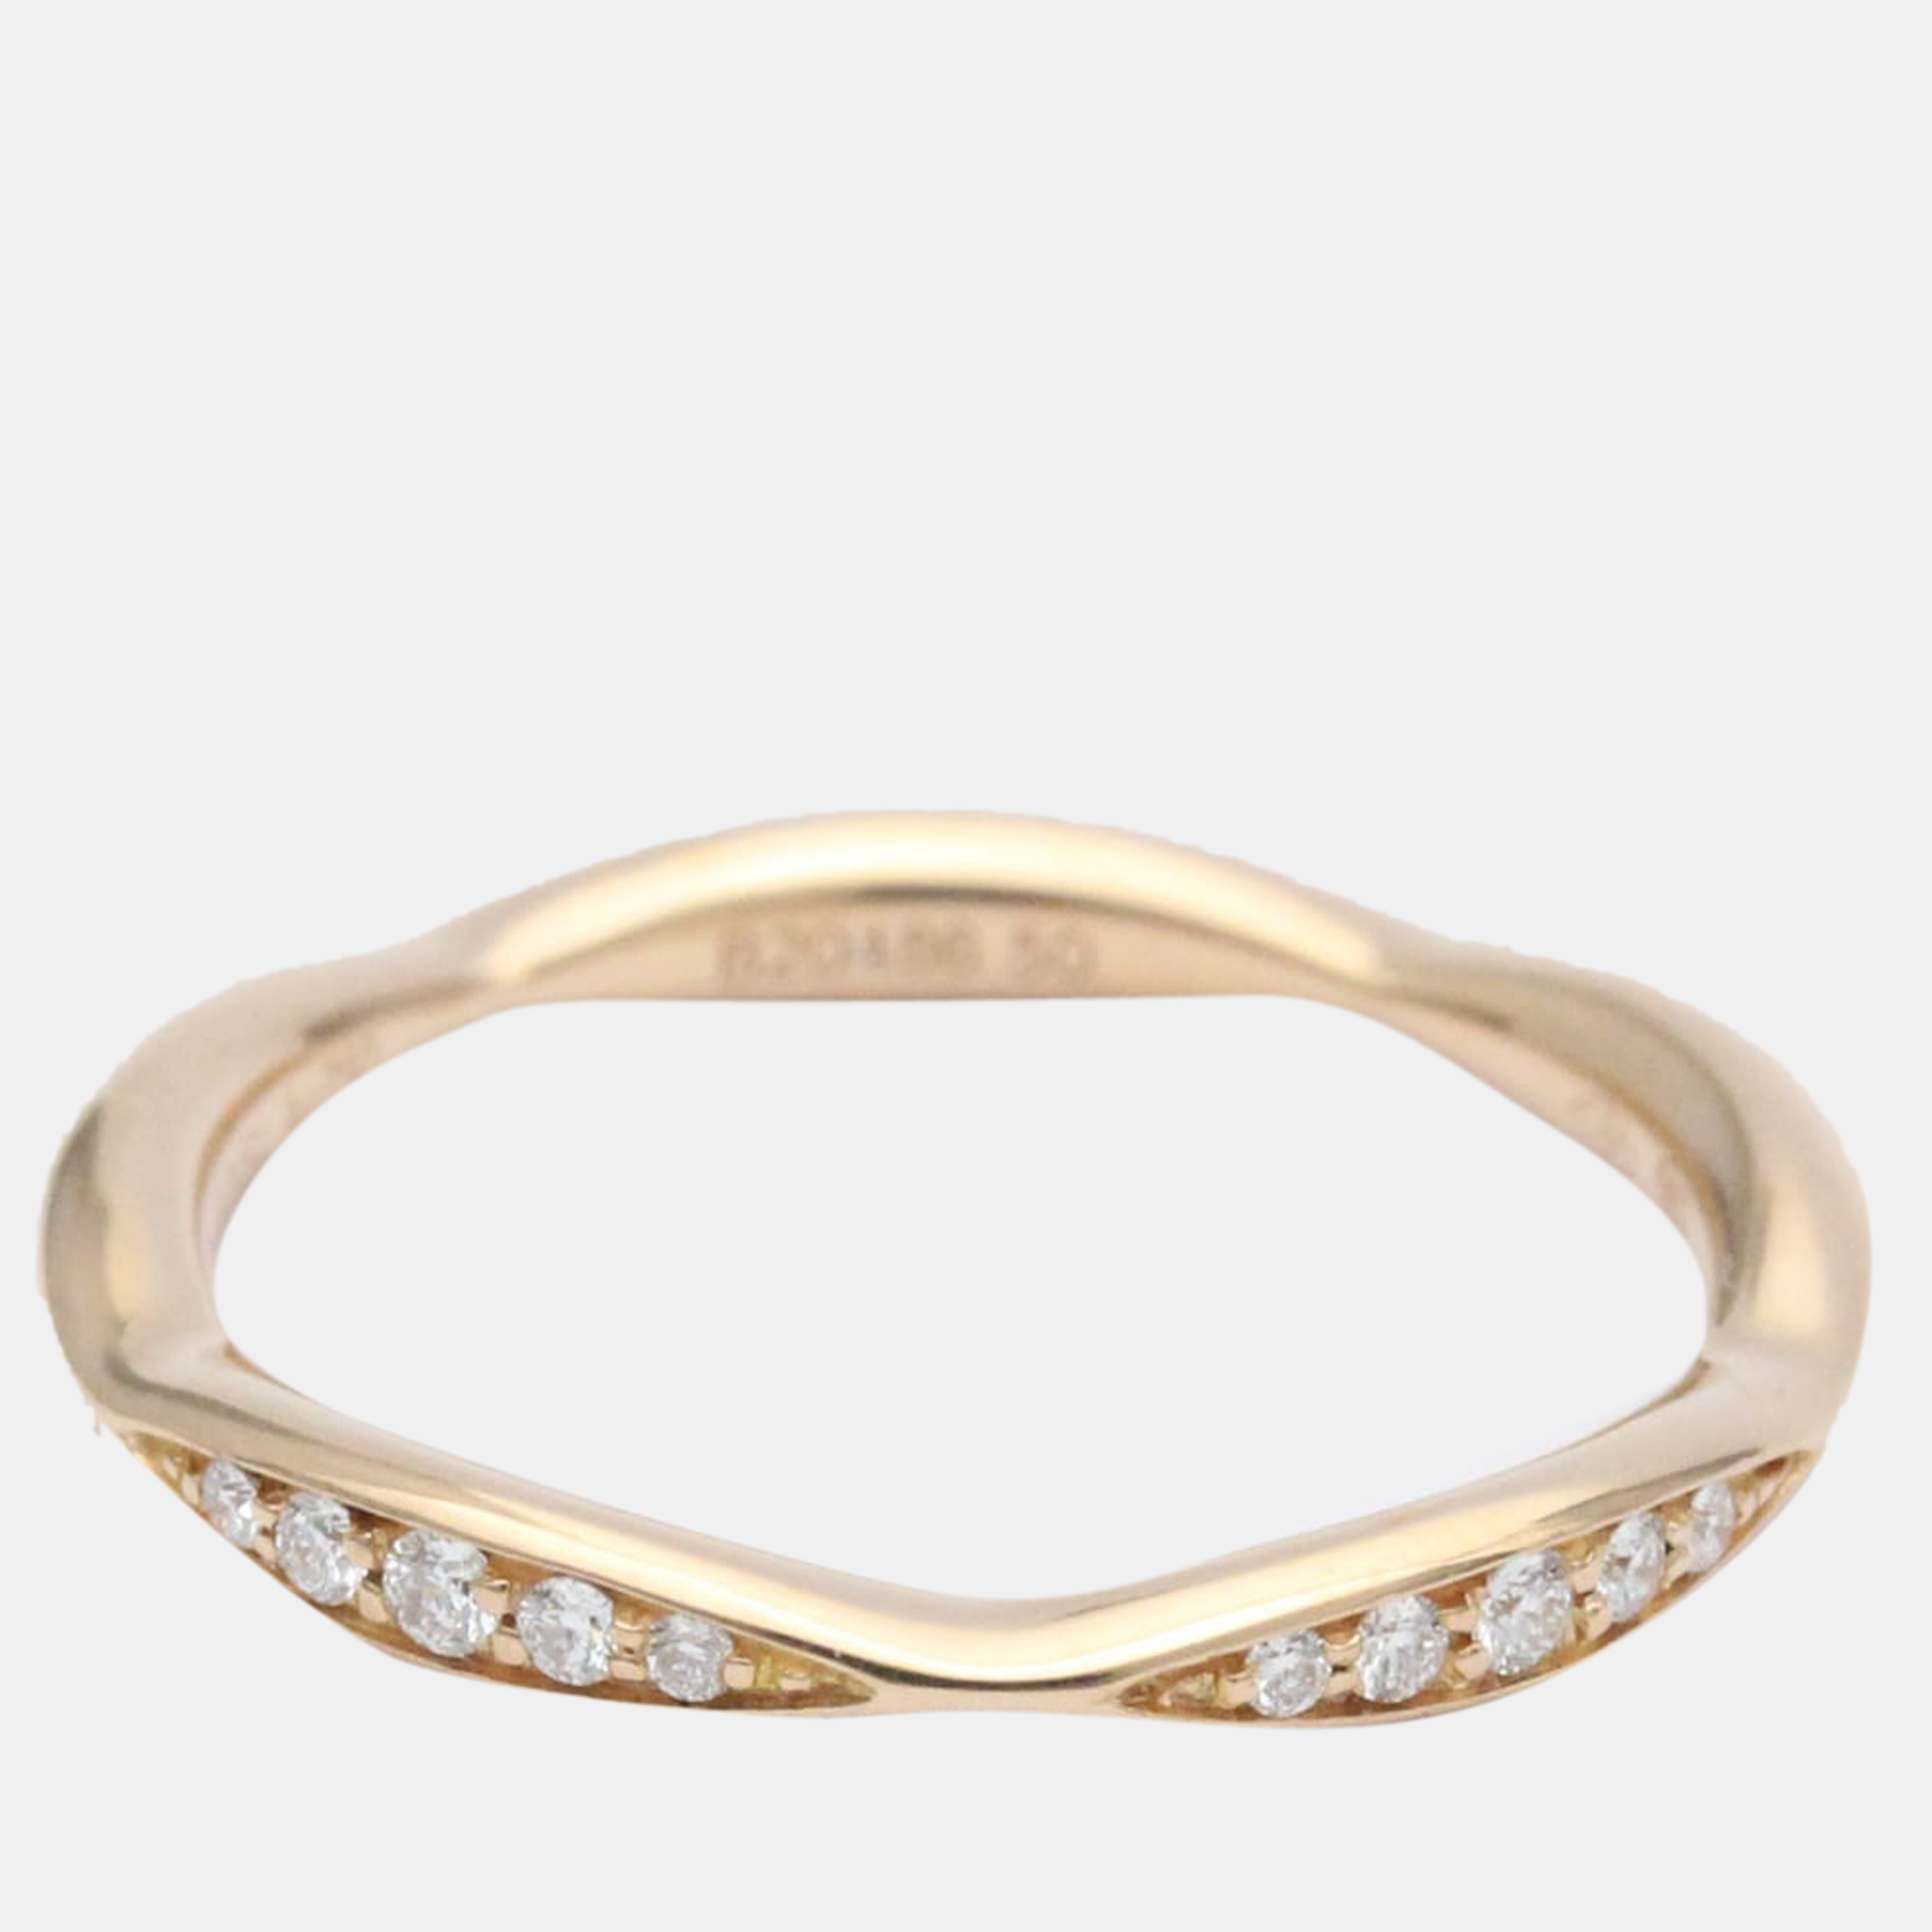 Pre-owned Chanel Rose Gold Ring